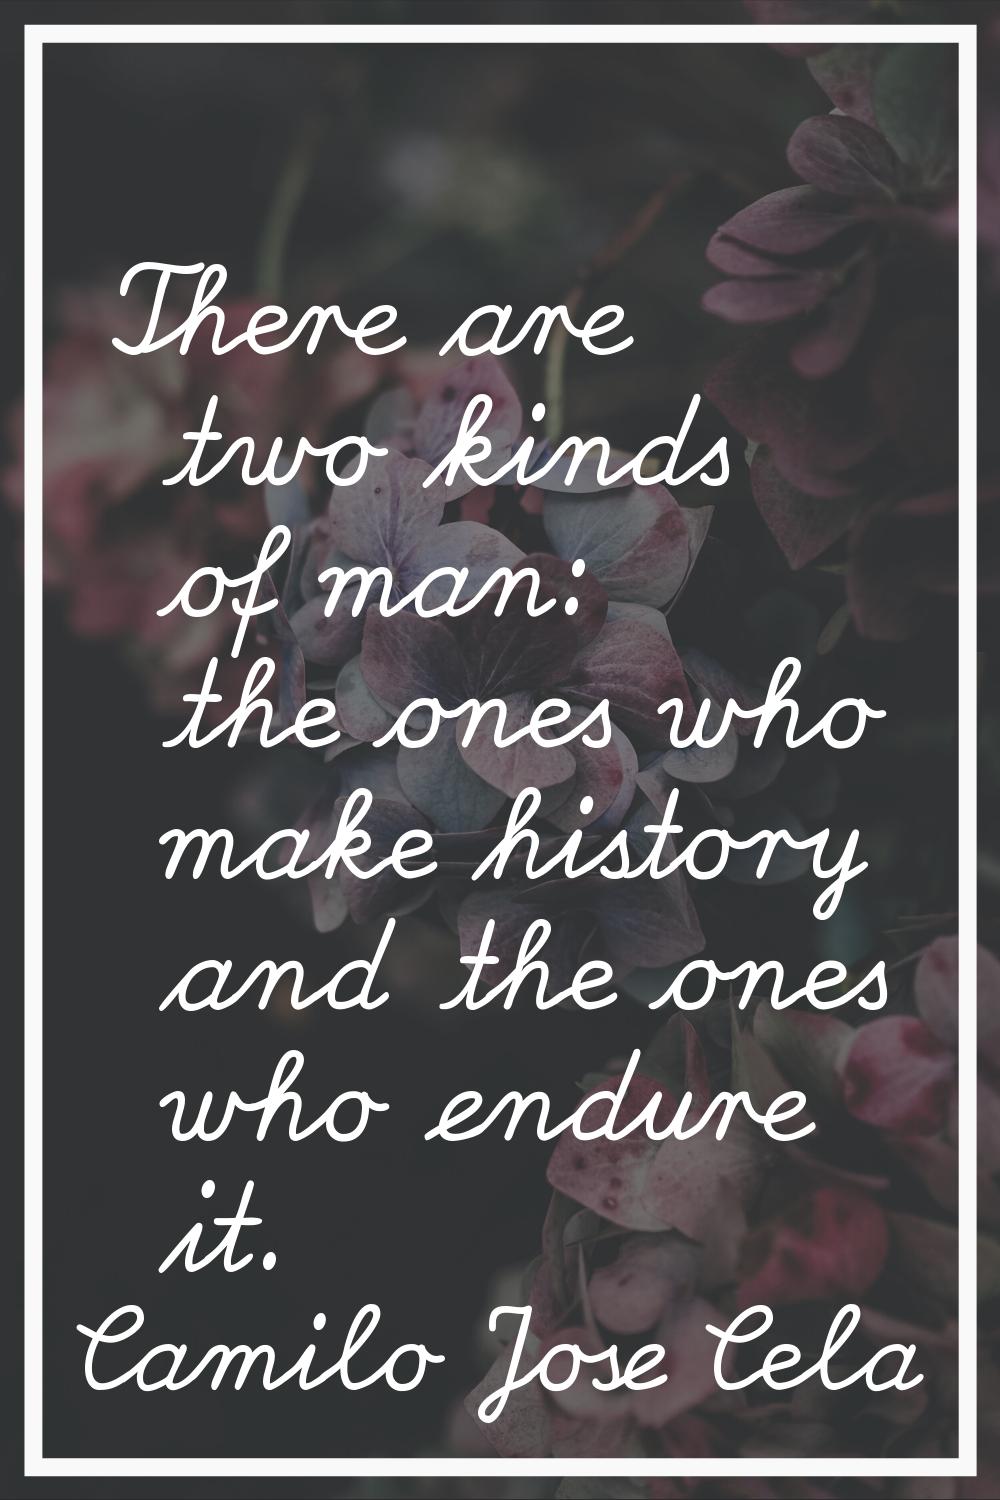 There are two kinds of man: the ones who make history and the ones who endure it.